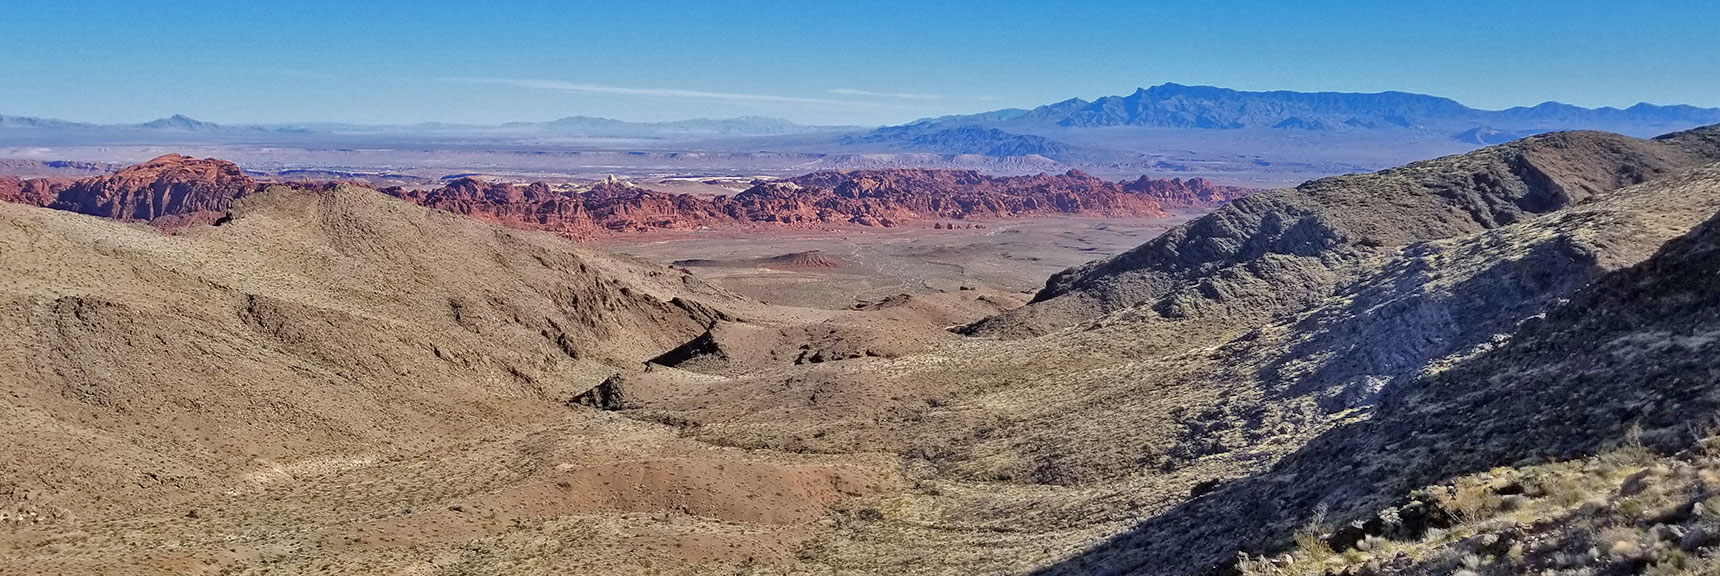 Looking Down a Valley Toward Eastern Valley of Fire State Park from the Muddy Mountains Wilderness, Nevada